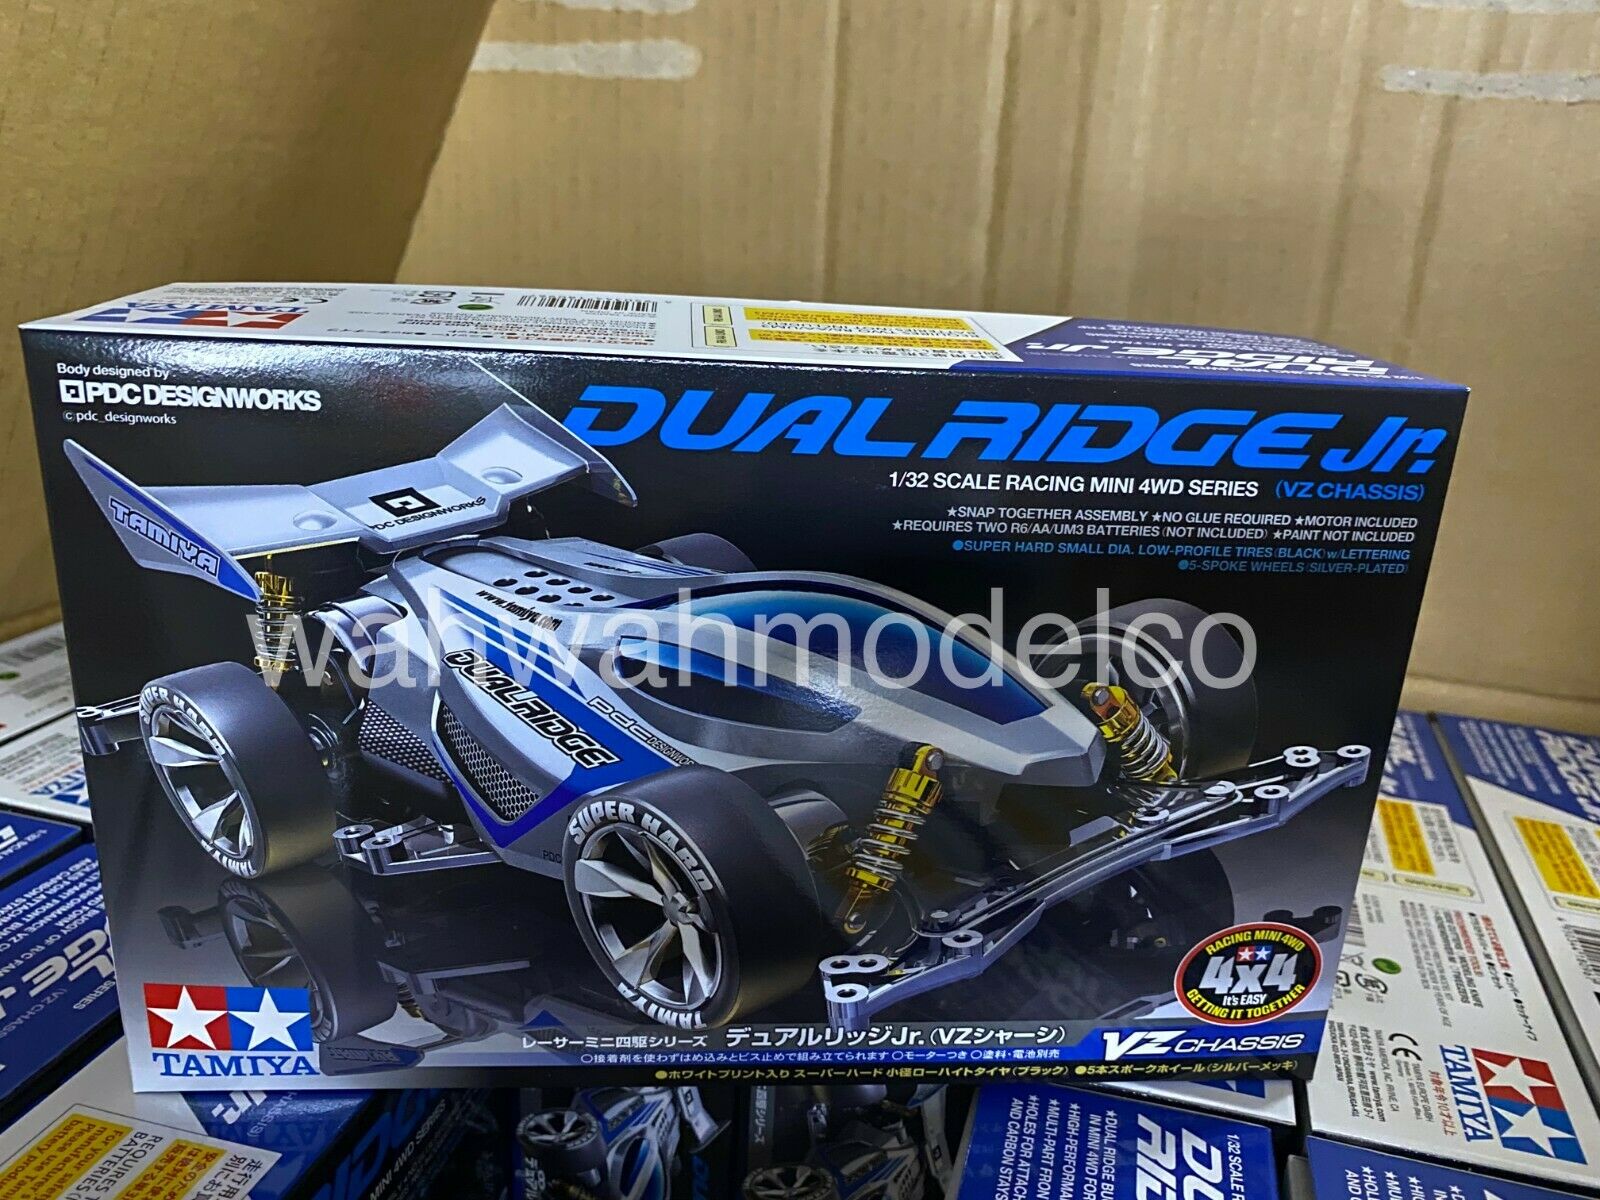 Official mini 4wd race regulations · upcoming tamiya releases · information and materials · upcoming events in japan · mini 4wd cars by category · a wide range of . Tamiya 18096 1 32 Mini 4wd Car Kit Vz Chassis Dual Ridge Junior Jr